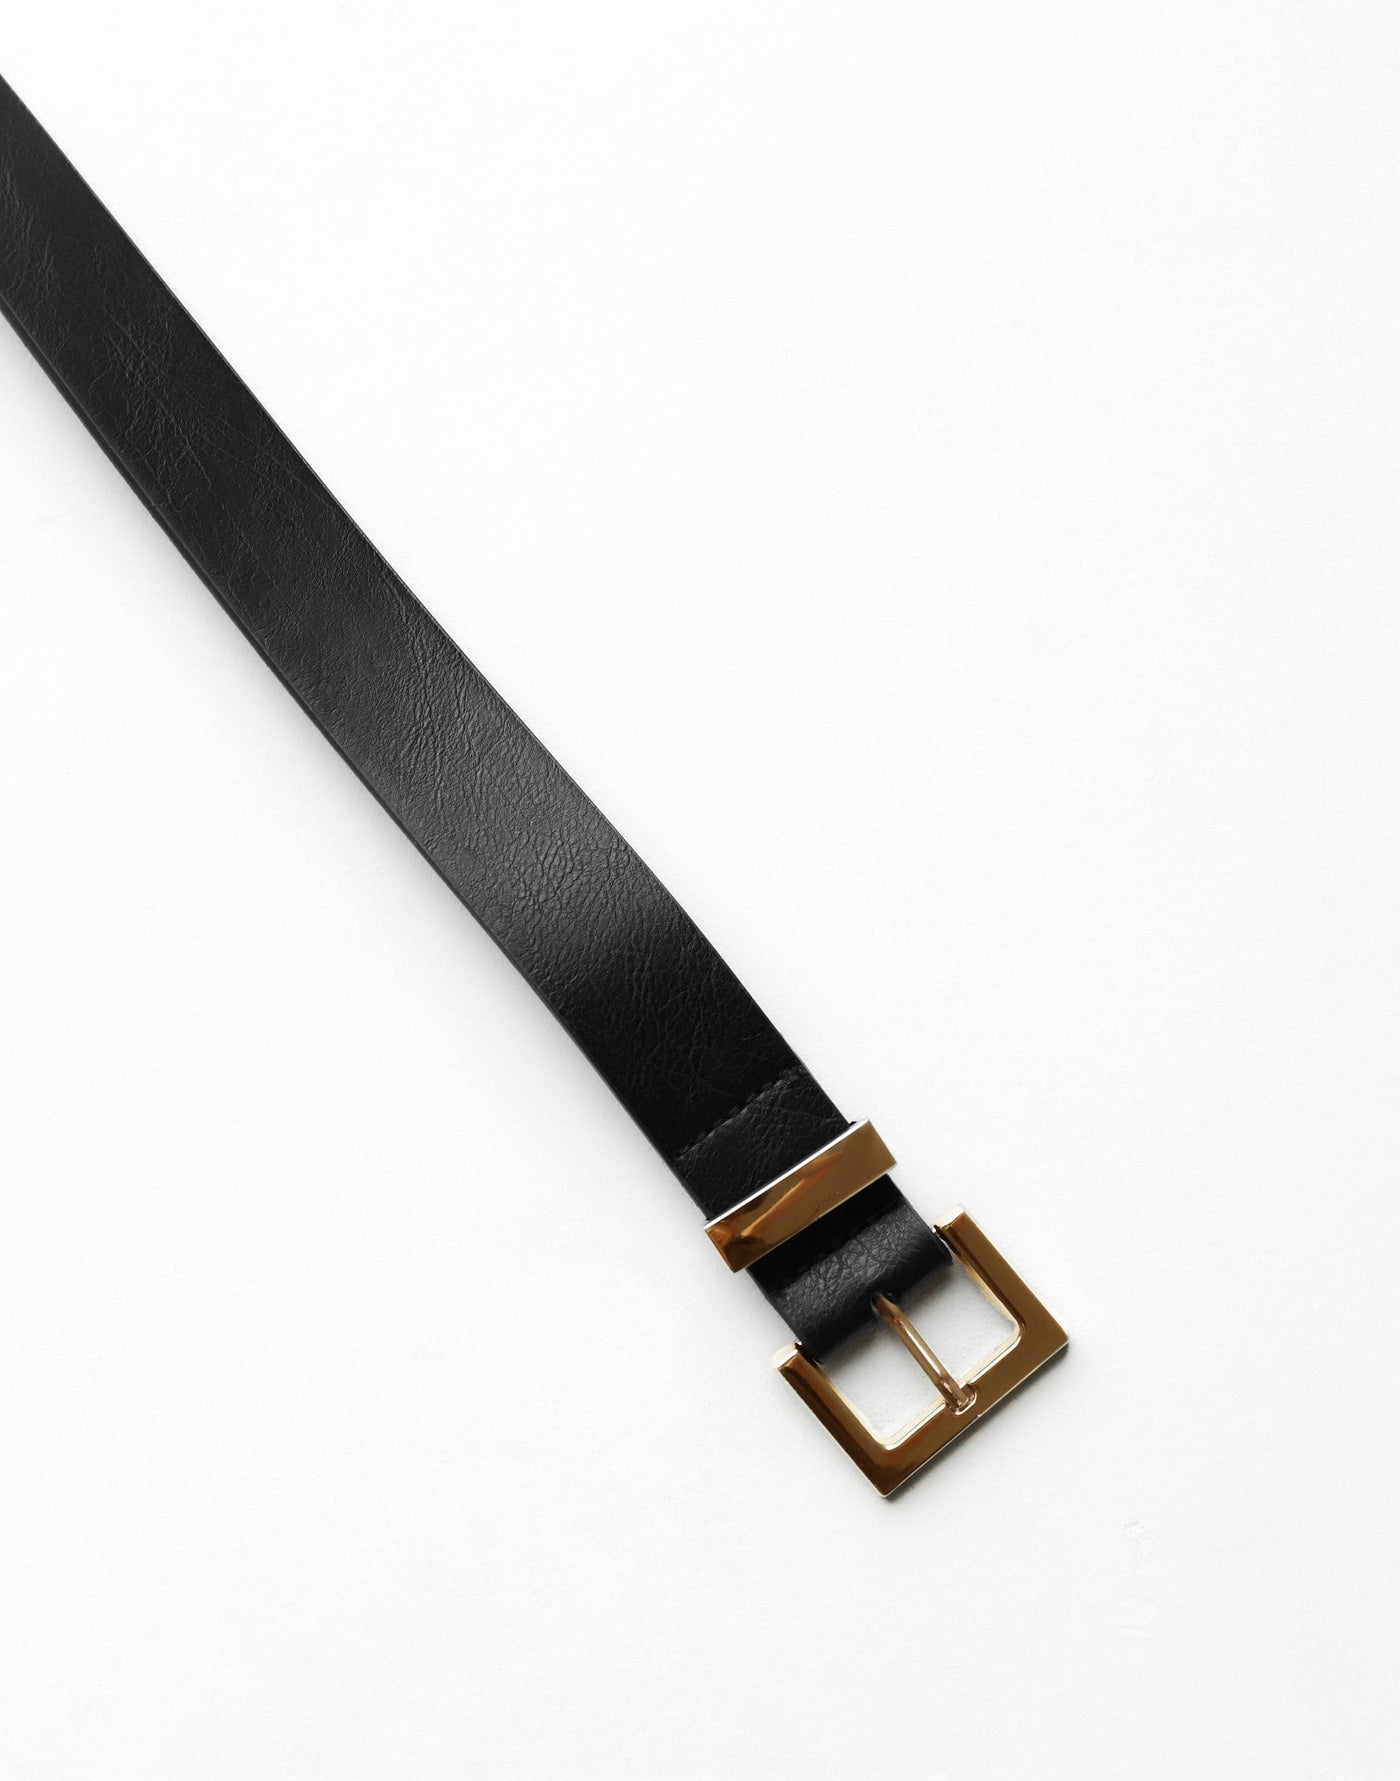 Angeline Belt (Black/Gold) | CHARCOAL Exclusive - Single Keeper Loop Rectangular Faux Leather Belt - Women's Accessories - Charcoal Clothing